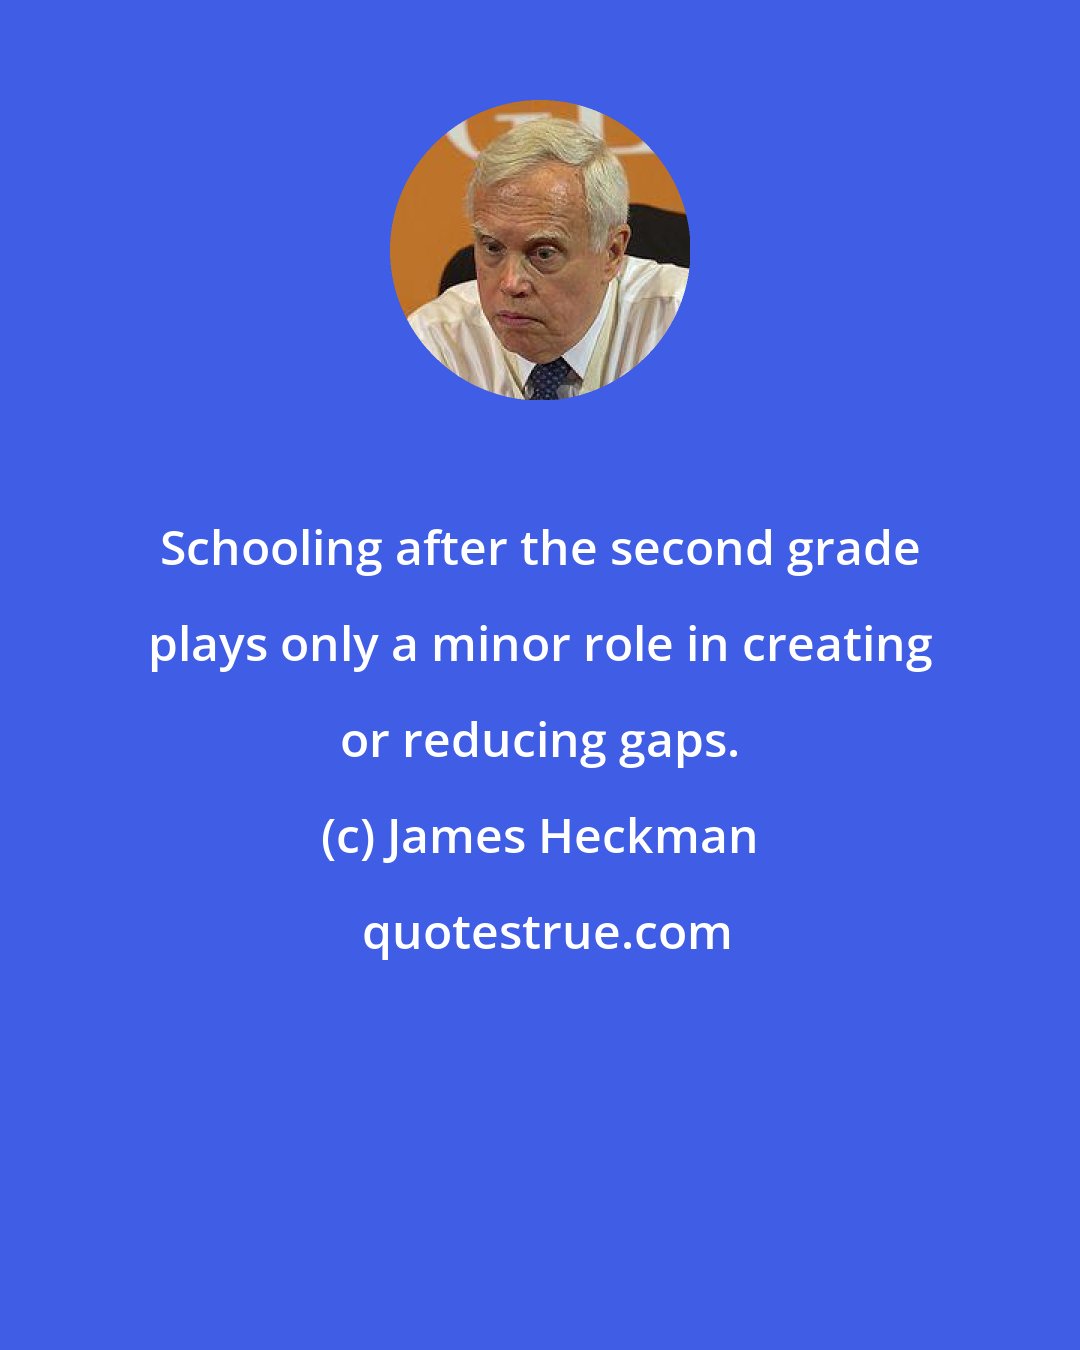 James Heckman: Schooling after the second grade plays only a minor role in creating or reducing gaps.